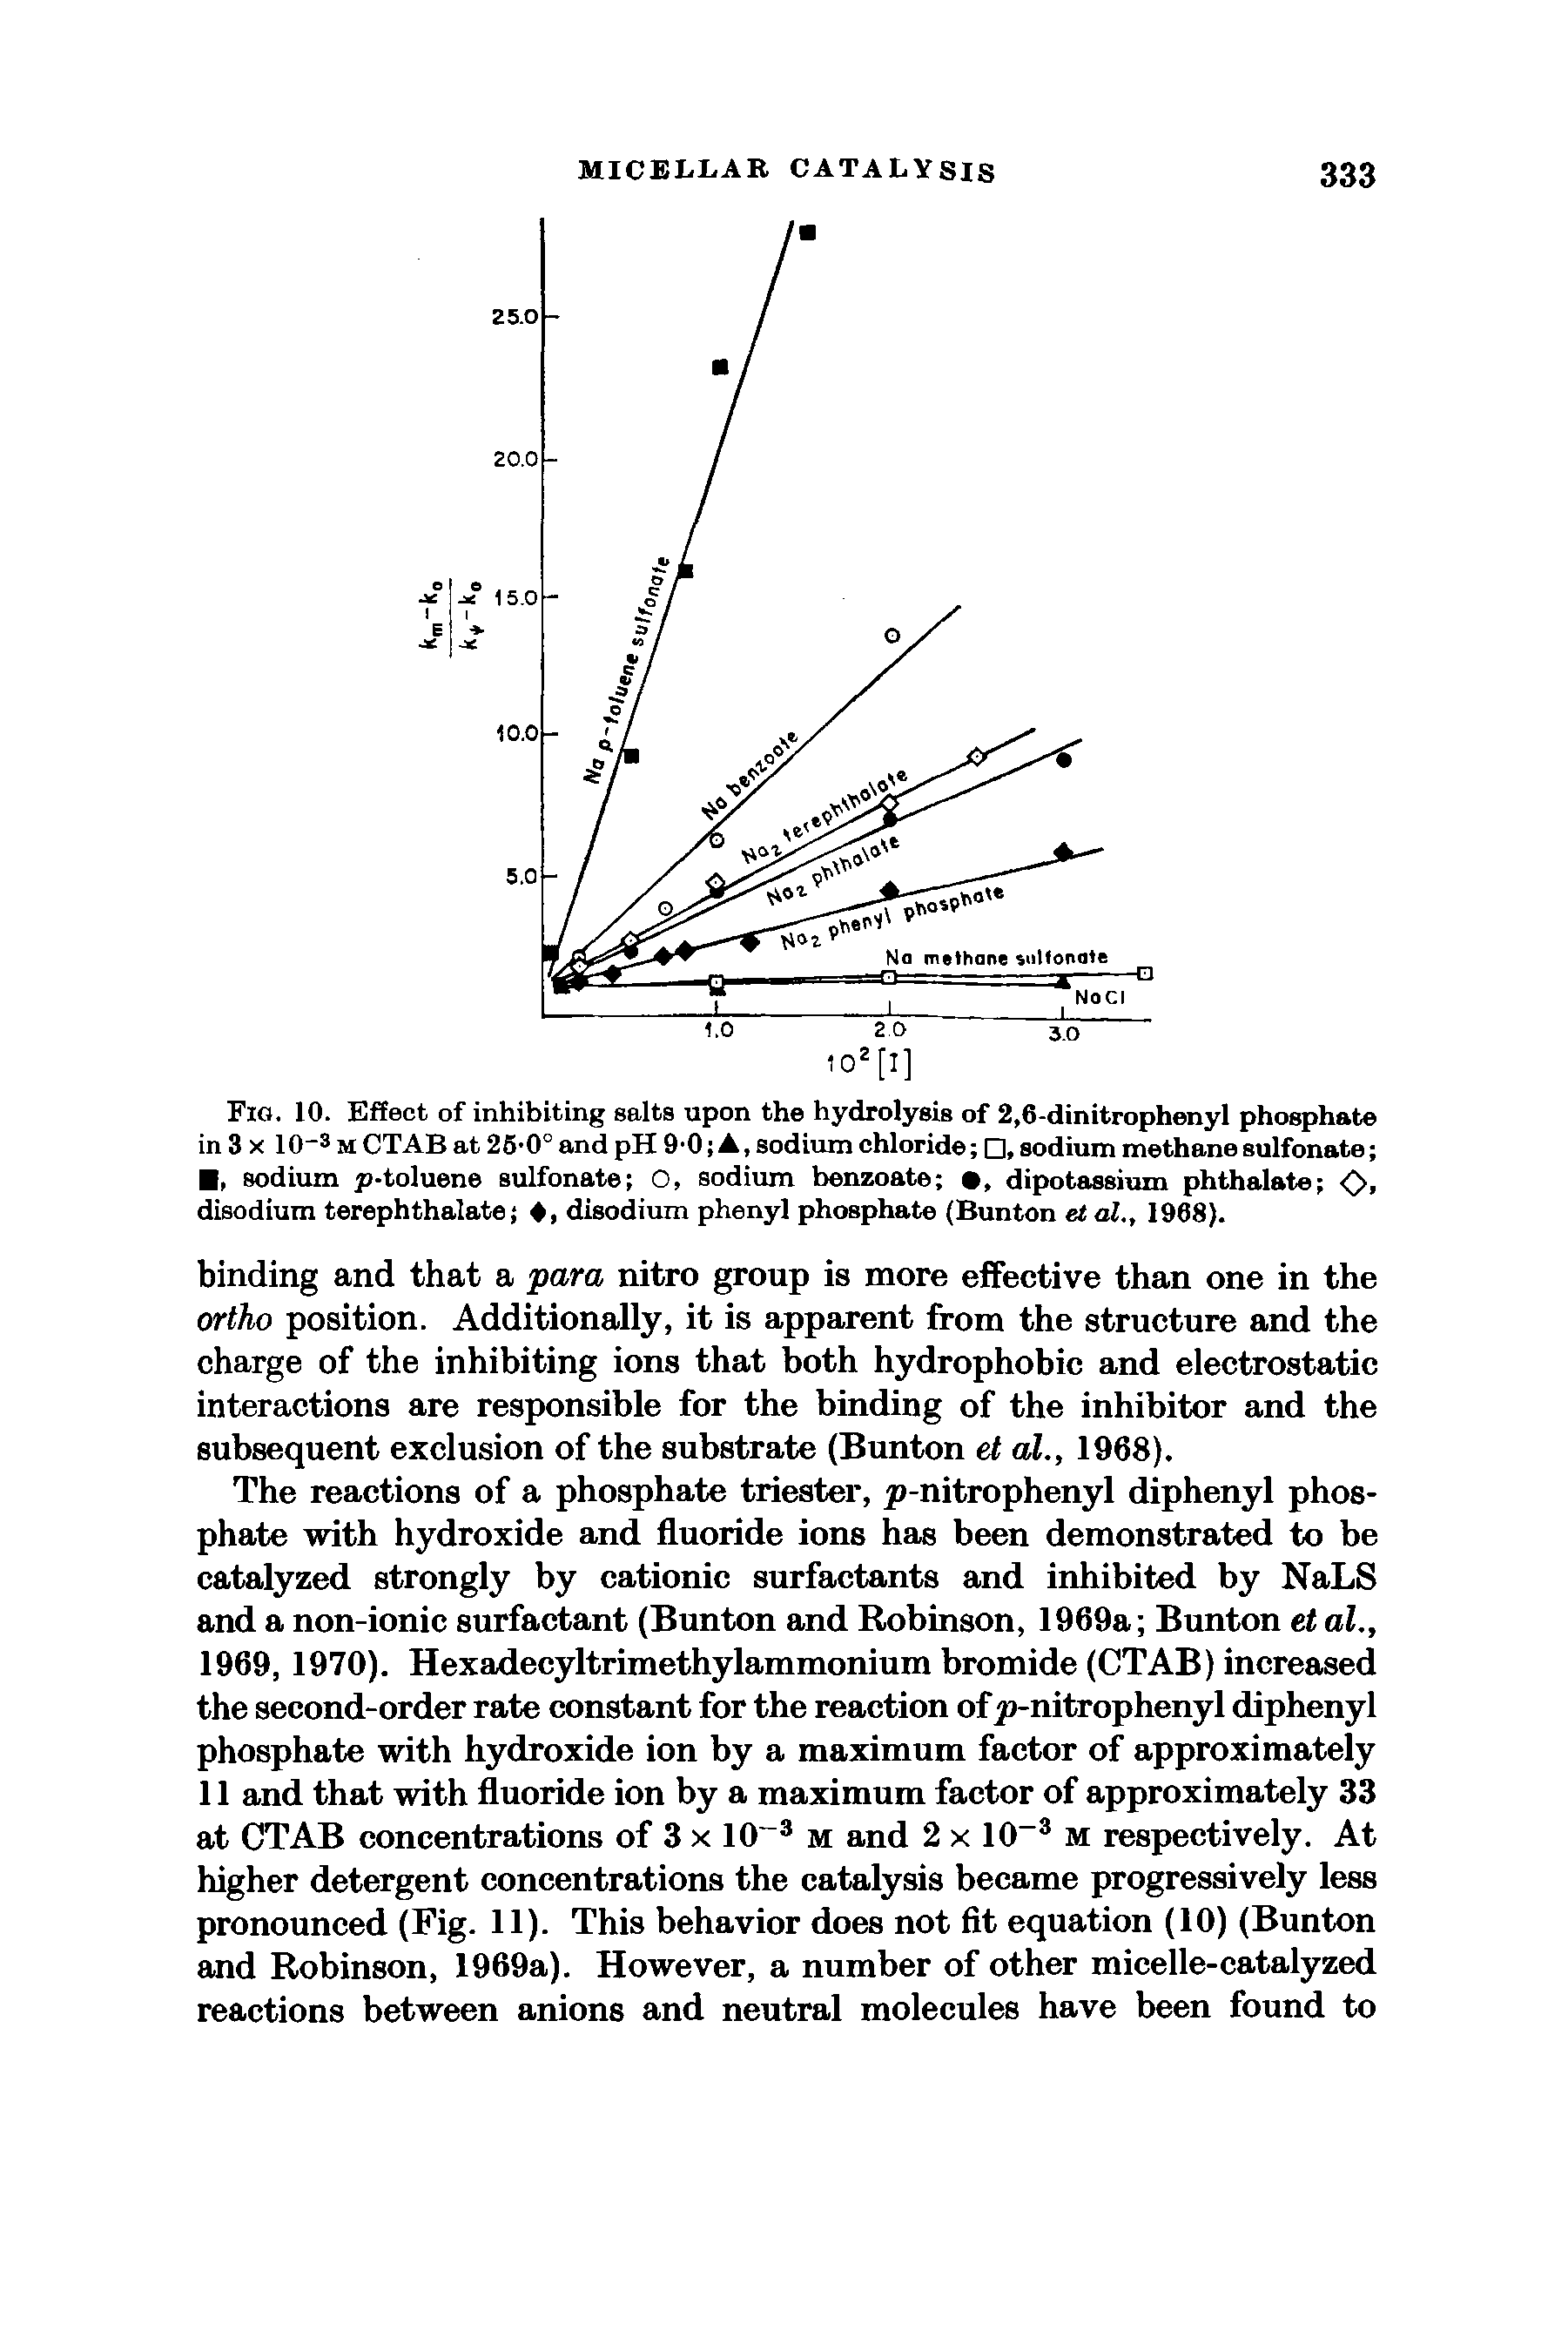 Fig. 10. Effect of inhibiting salts upon the hydrolysis of 2,6-dinitrophenyl phosphate in 3 X lO- MCTABat 25-0° and pH 9 0 A, sodium chloride .sodium methane sulfonate I. sodium P toluene sulfonate O. sodium benzoate . dipotassium phthalate o. disodium terephthalate disodium phenyl phosphate (Bunton et al., 1968).